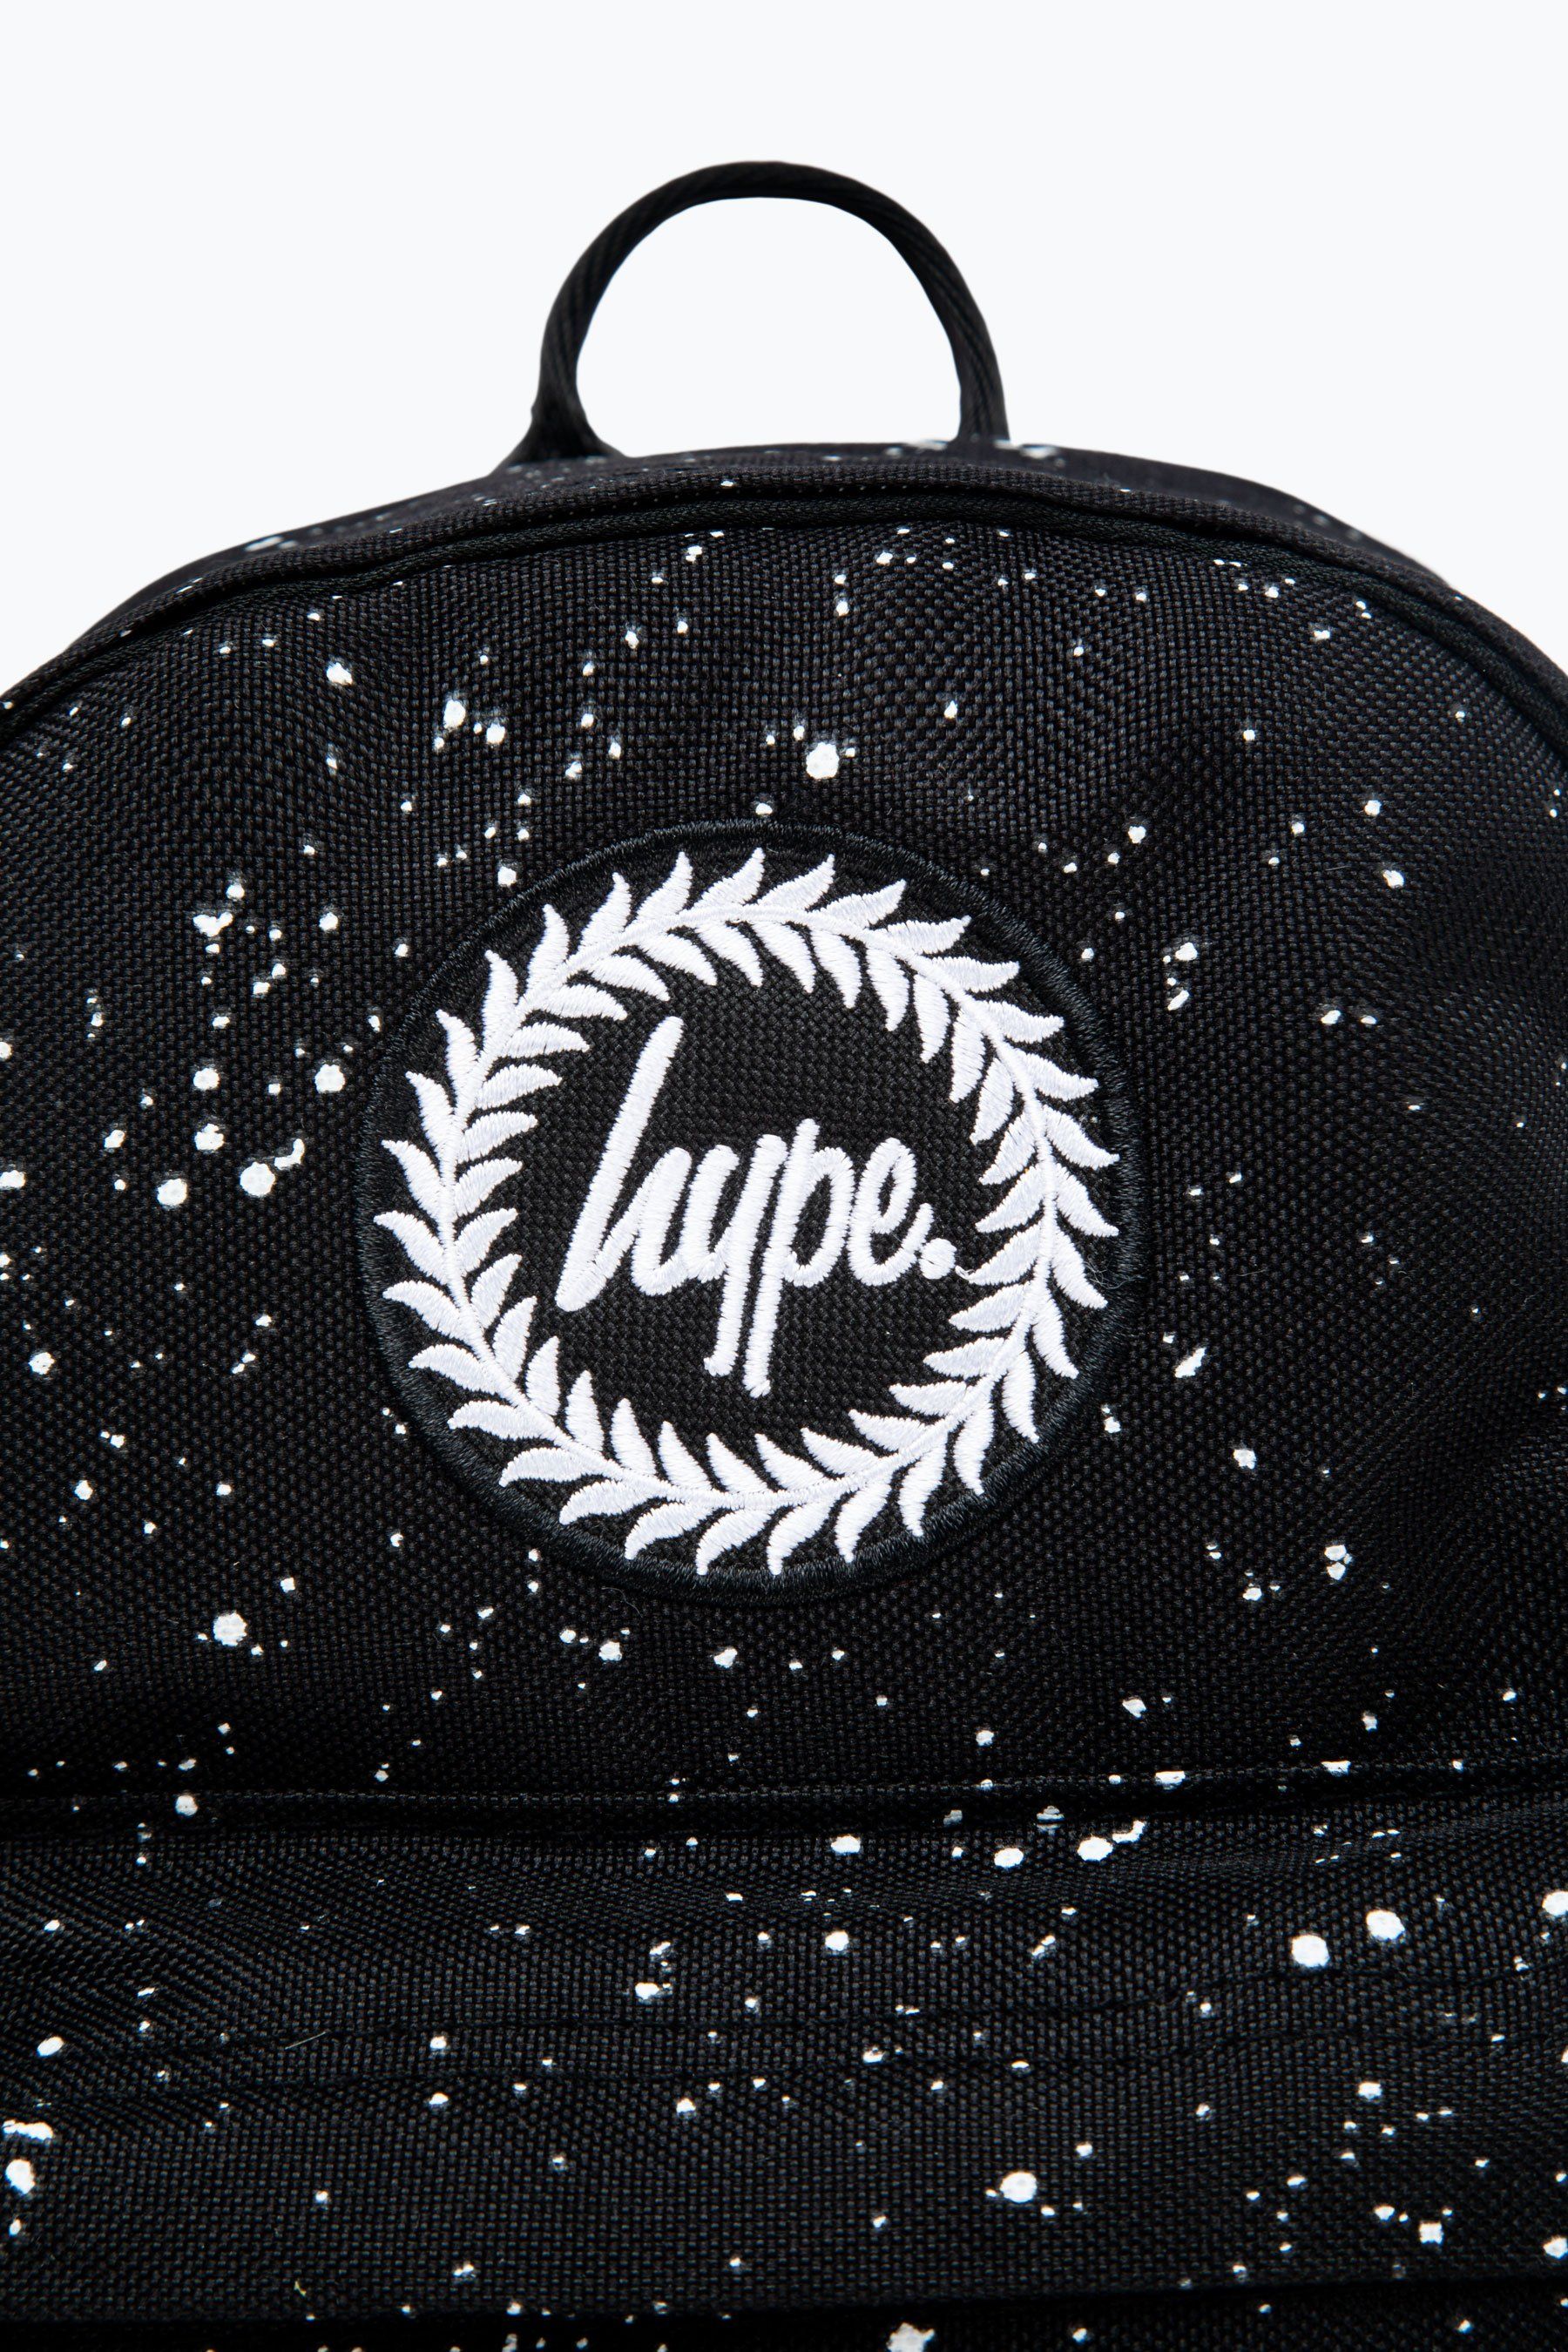 Introducing the HYPE. Black Speckle Mini Backpack, if you're reading this, then you want to know more. Our standard unisex mini backpack shape and style features our signature speckle fade all-over print in a monochrome colour palette. This backpack is the ultimate essential mini bag to transport your everyday essentials, this bag is smaller than our standard backpacks. With embossed adjustable straps with the perfect amount of padding. Finished with the iconic HYPE. crest logo embroidered on the front. Wipe clean only.